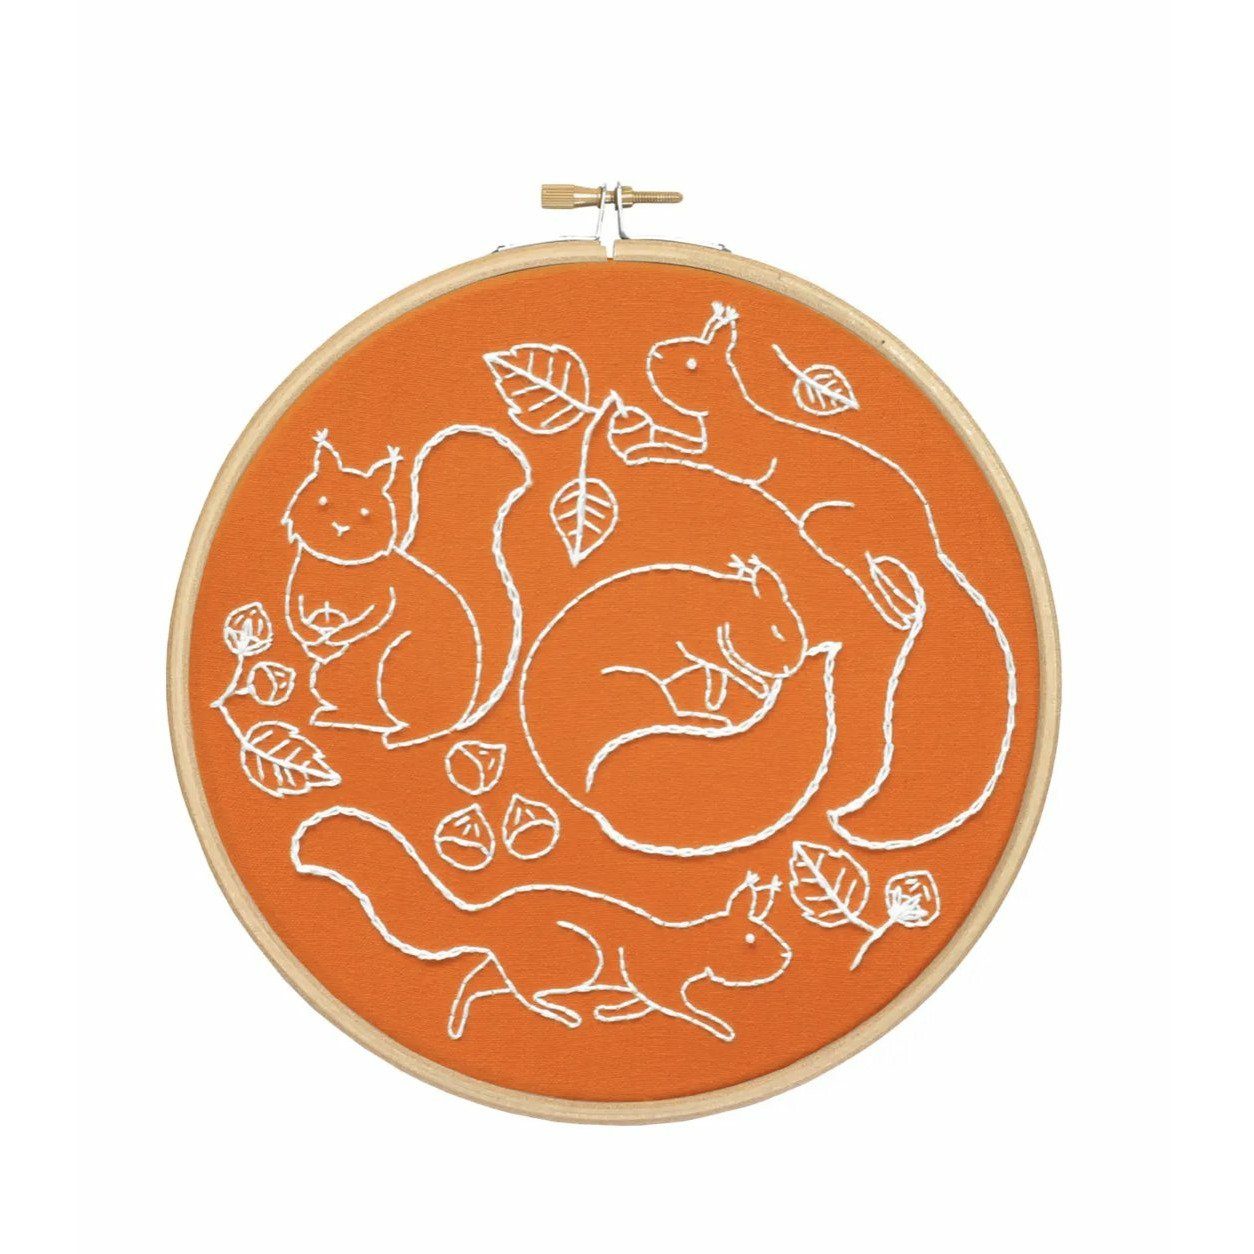 Beginner’s Autumn Embroidery Sewing Kits - Scurrying Squirrels